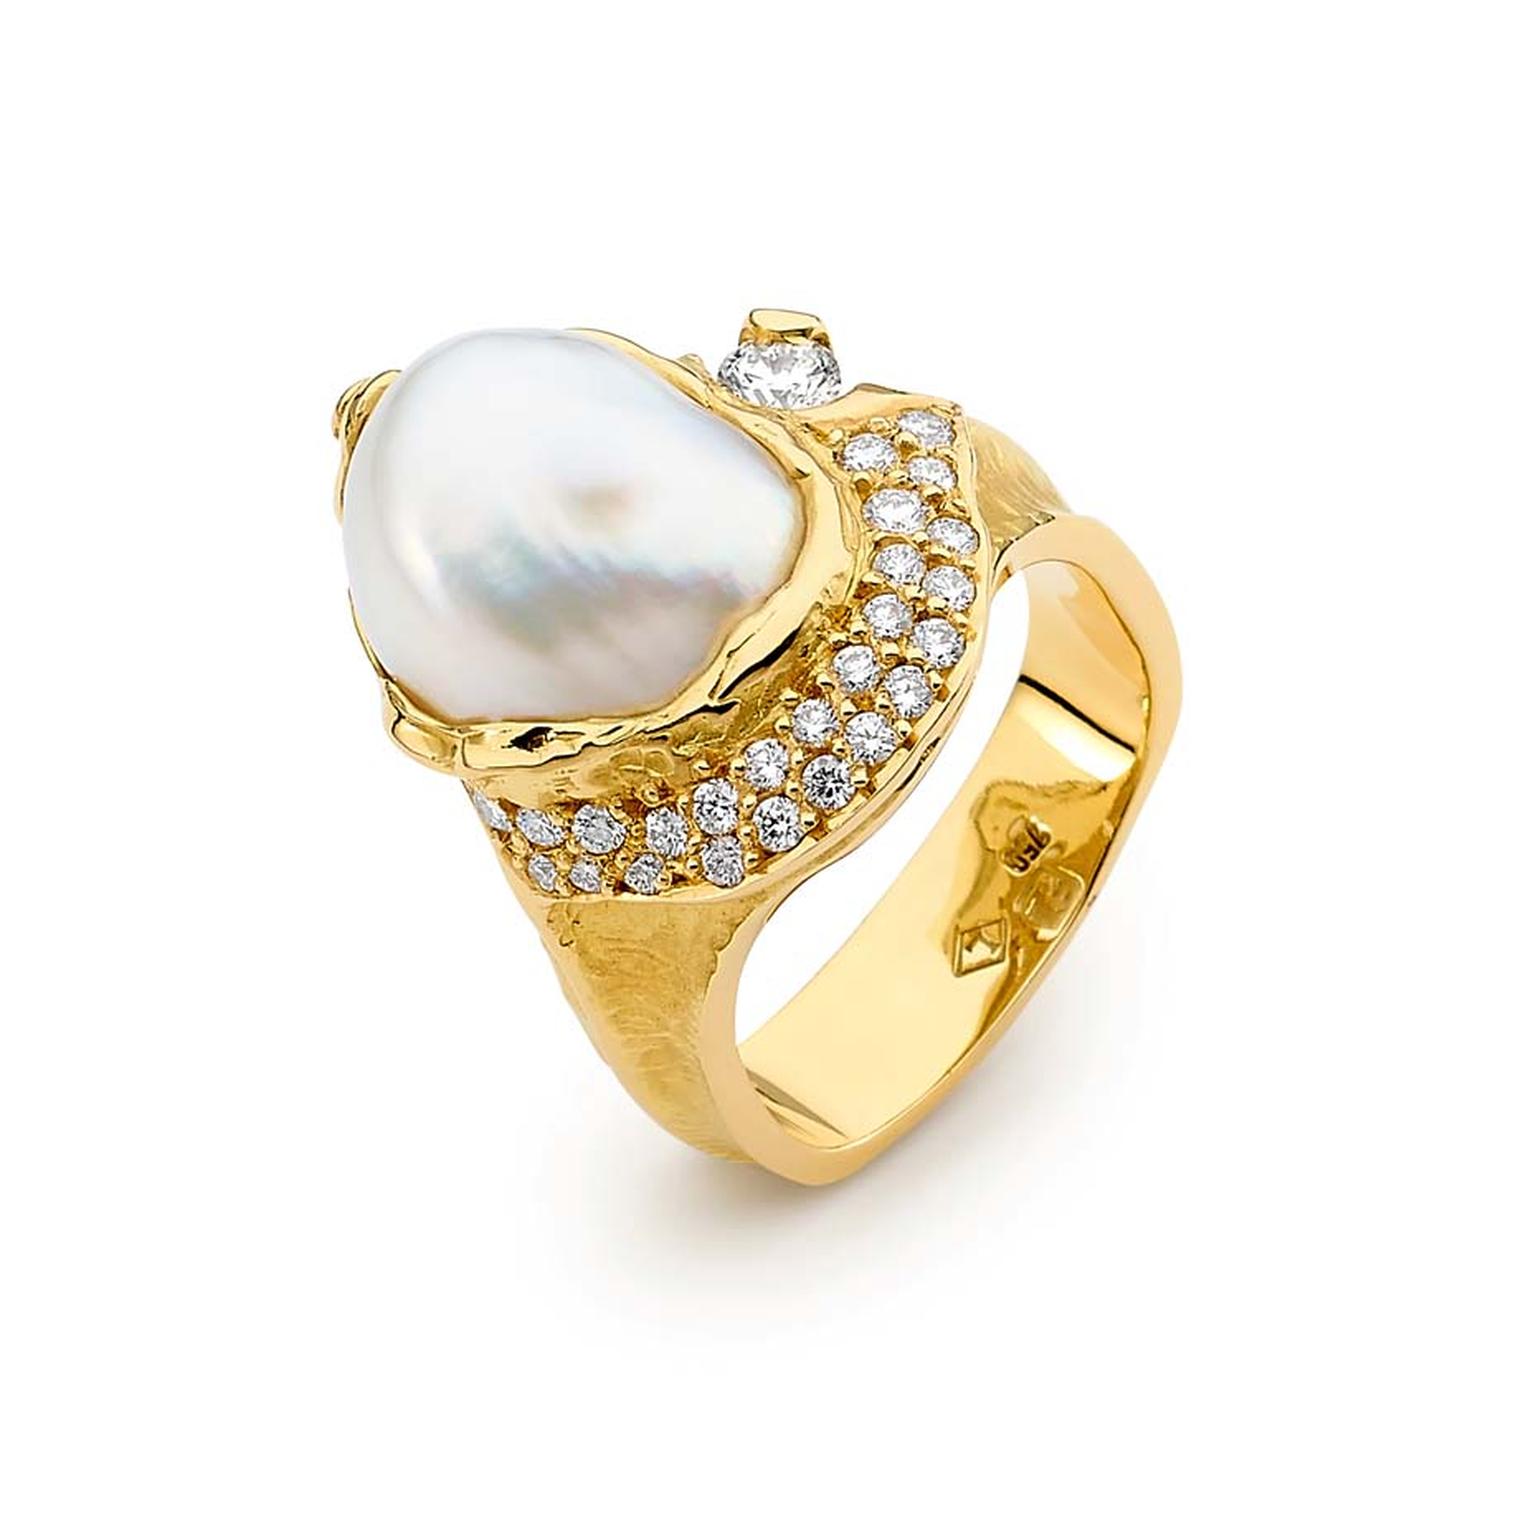 Linneys Australian seedless South Sea pearl ring in yellow gold with diamonds.